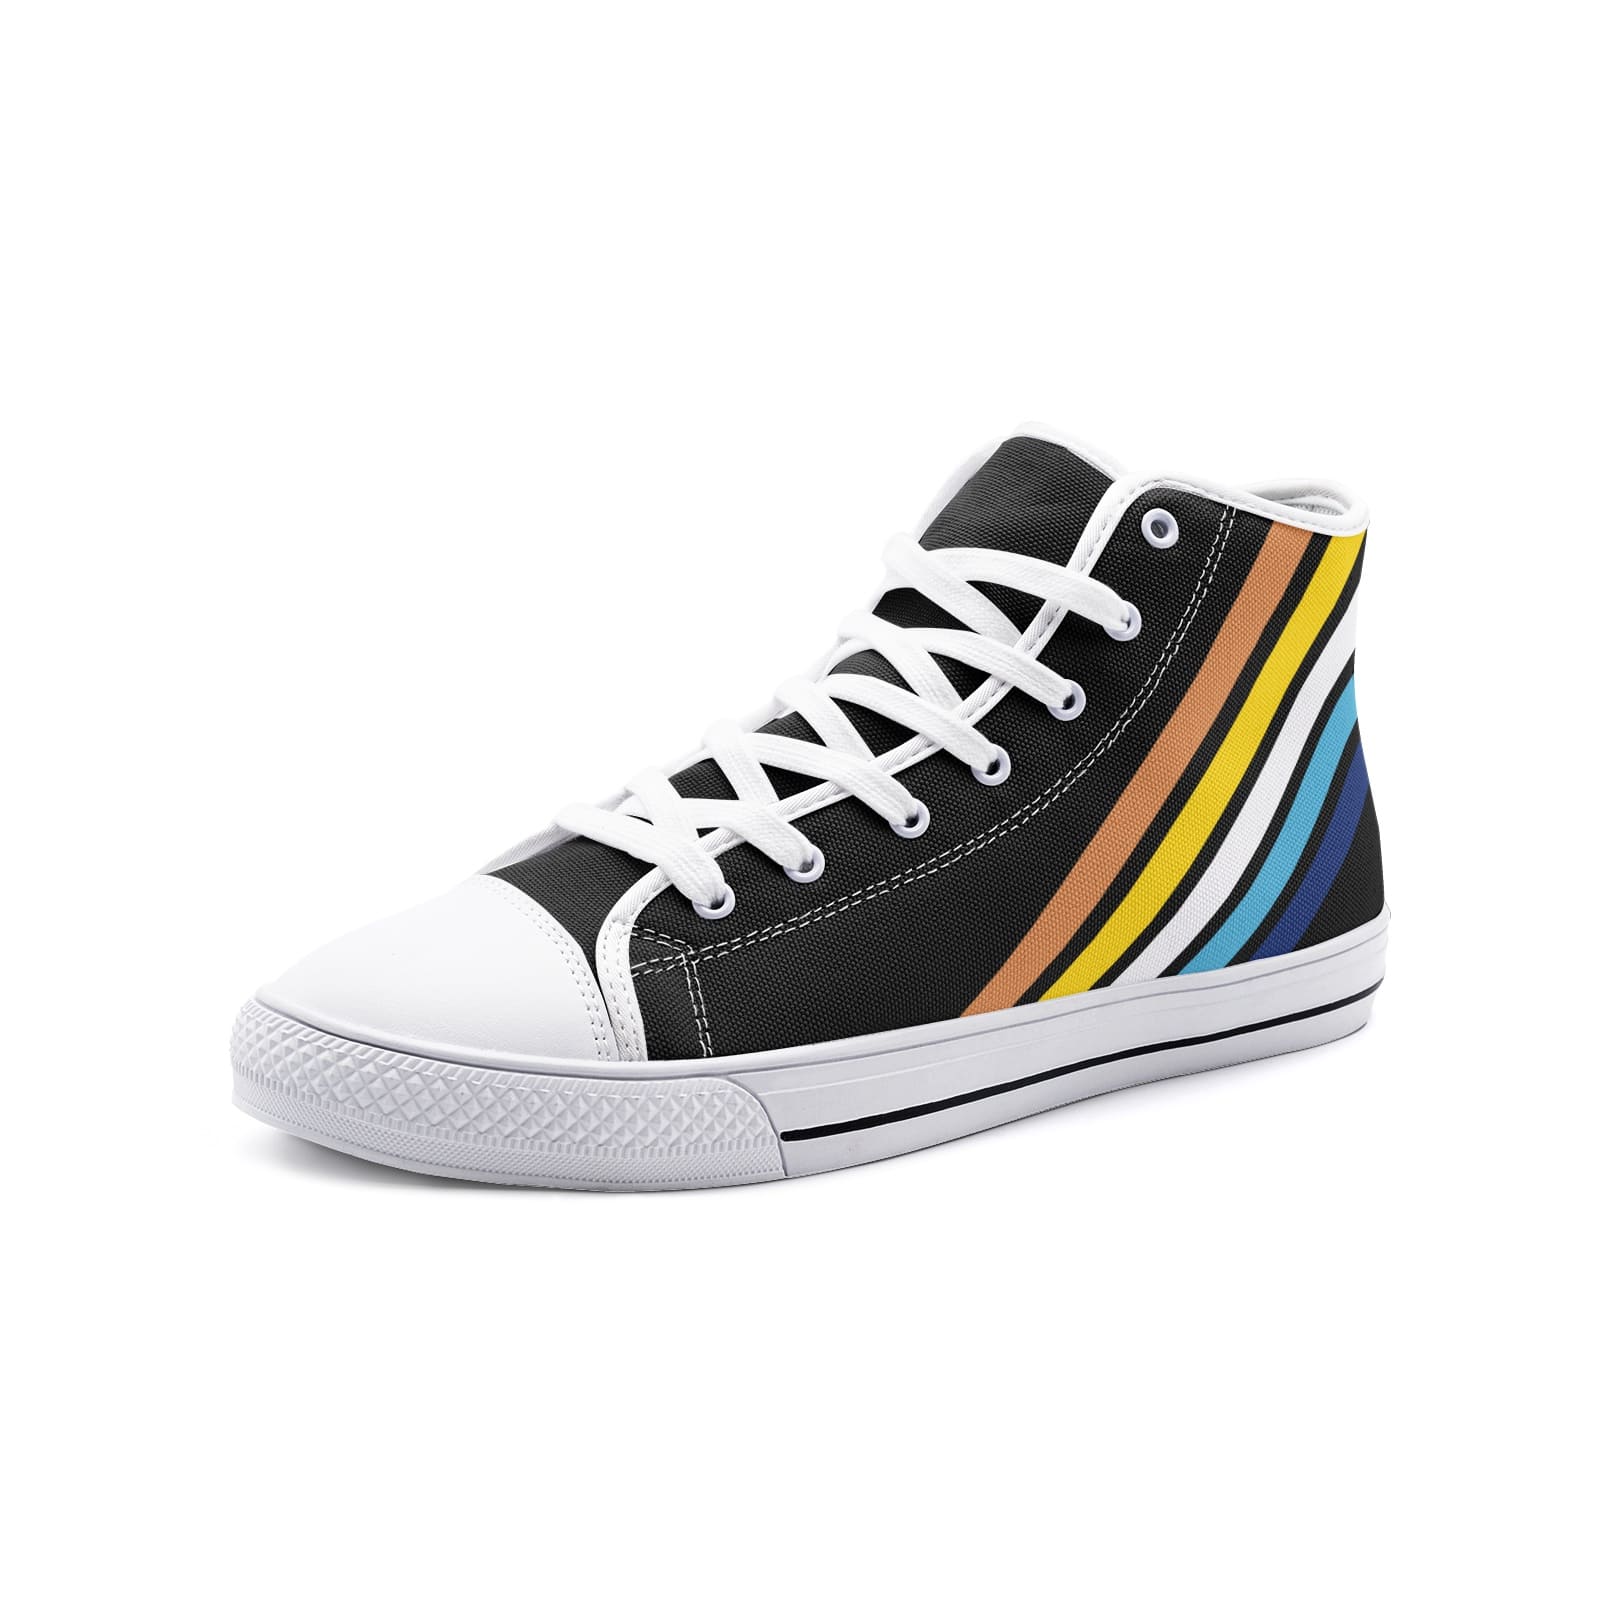 aroace shoes, subtle aro ace sneakers, white